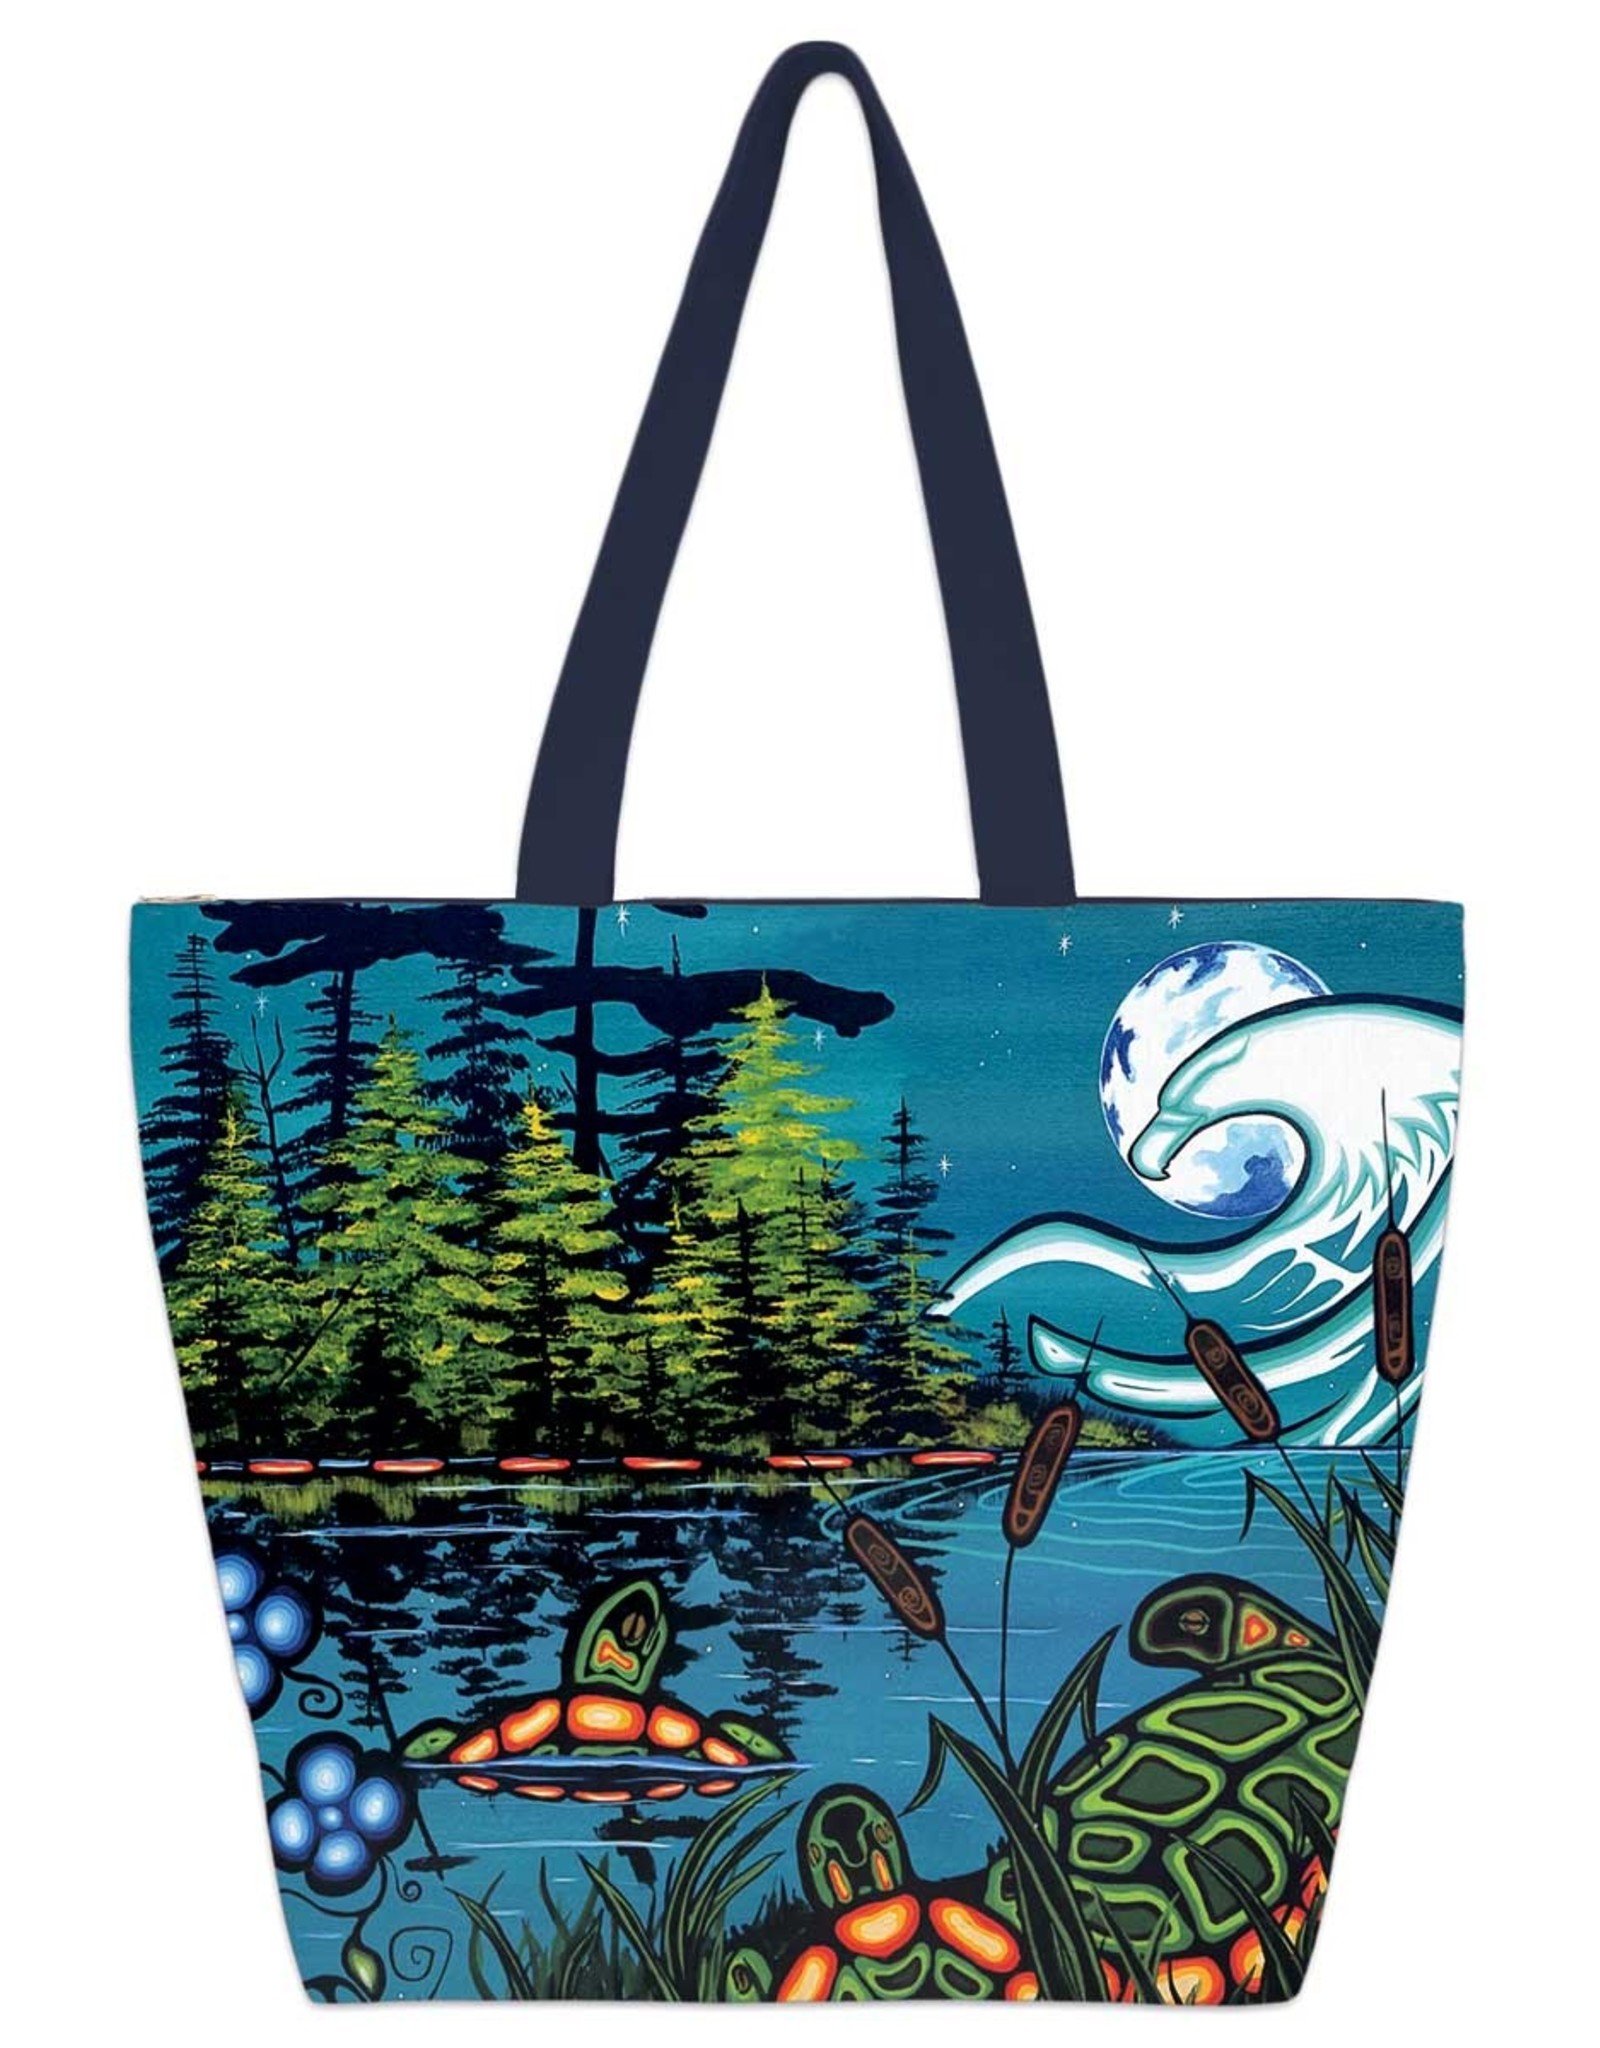 Tranquility by William Monague Tote Bag - POD2143TOTE